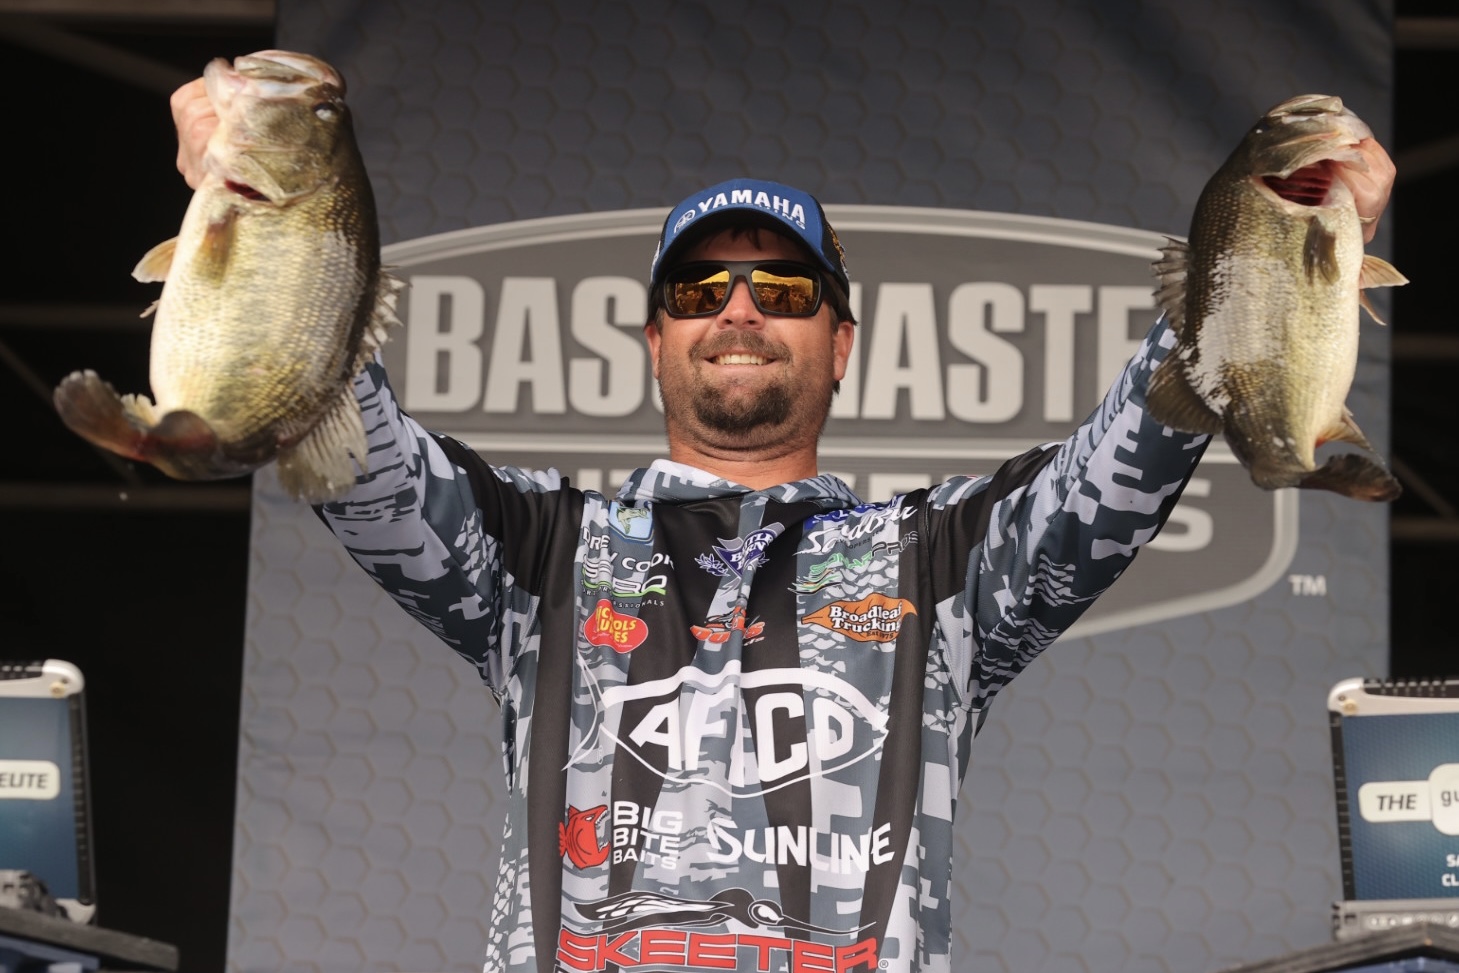 Kuphall first Wisconsin angler to win a Bassmaster Elite tourney